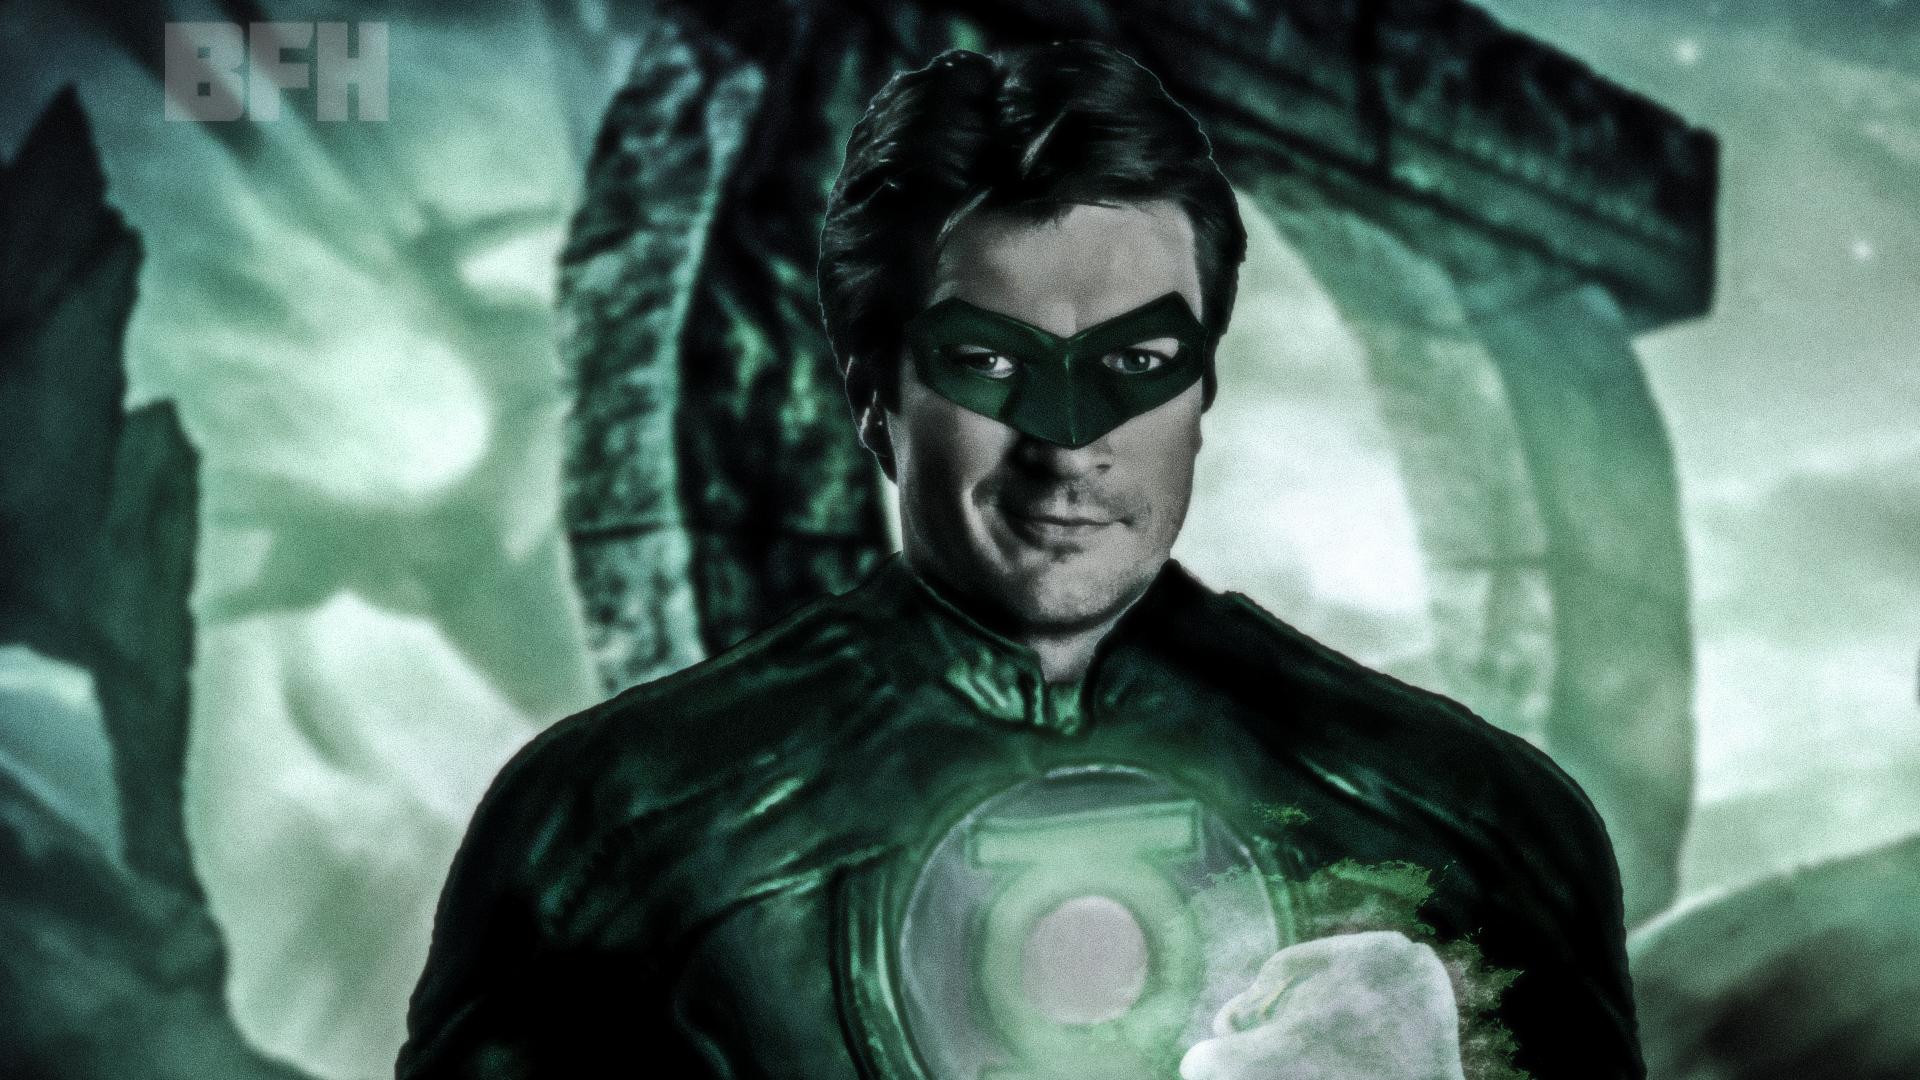 Nathan fillion is the perfect choice to play an older hal Jordan